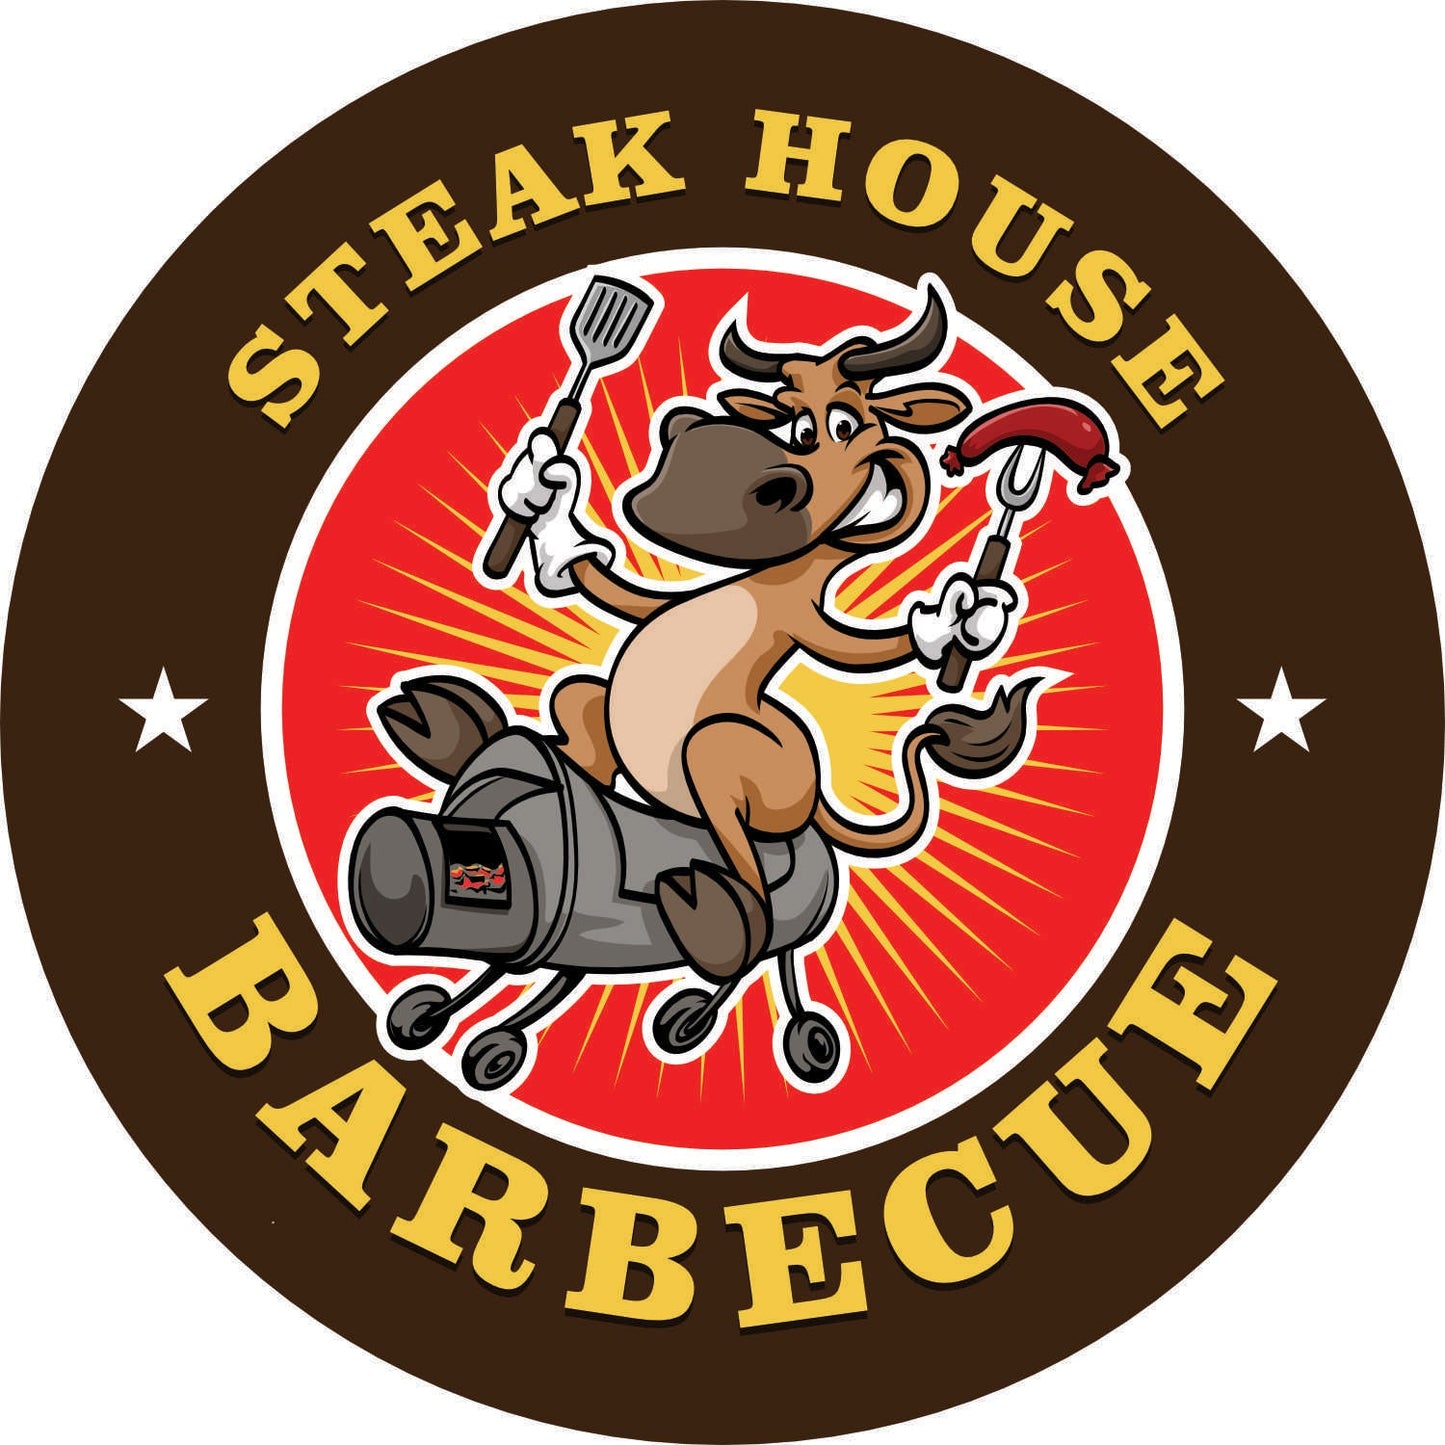 103-Single-sided illuminated sign - BBQ Steak House Barbecue